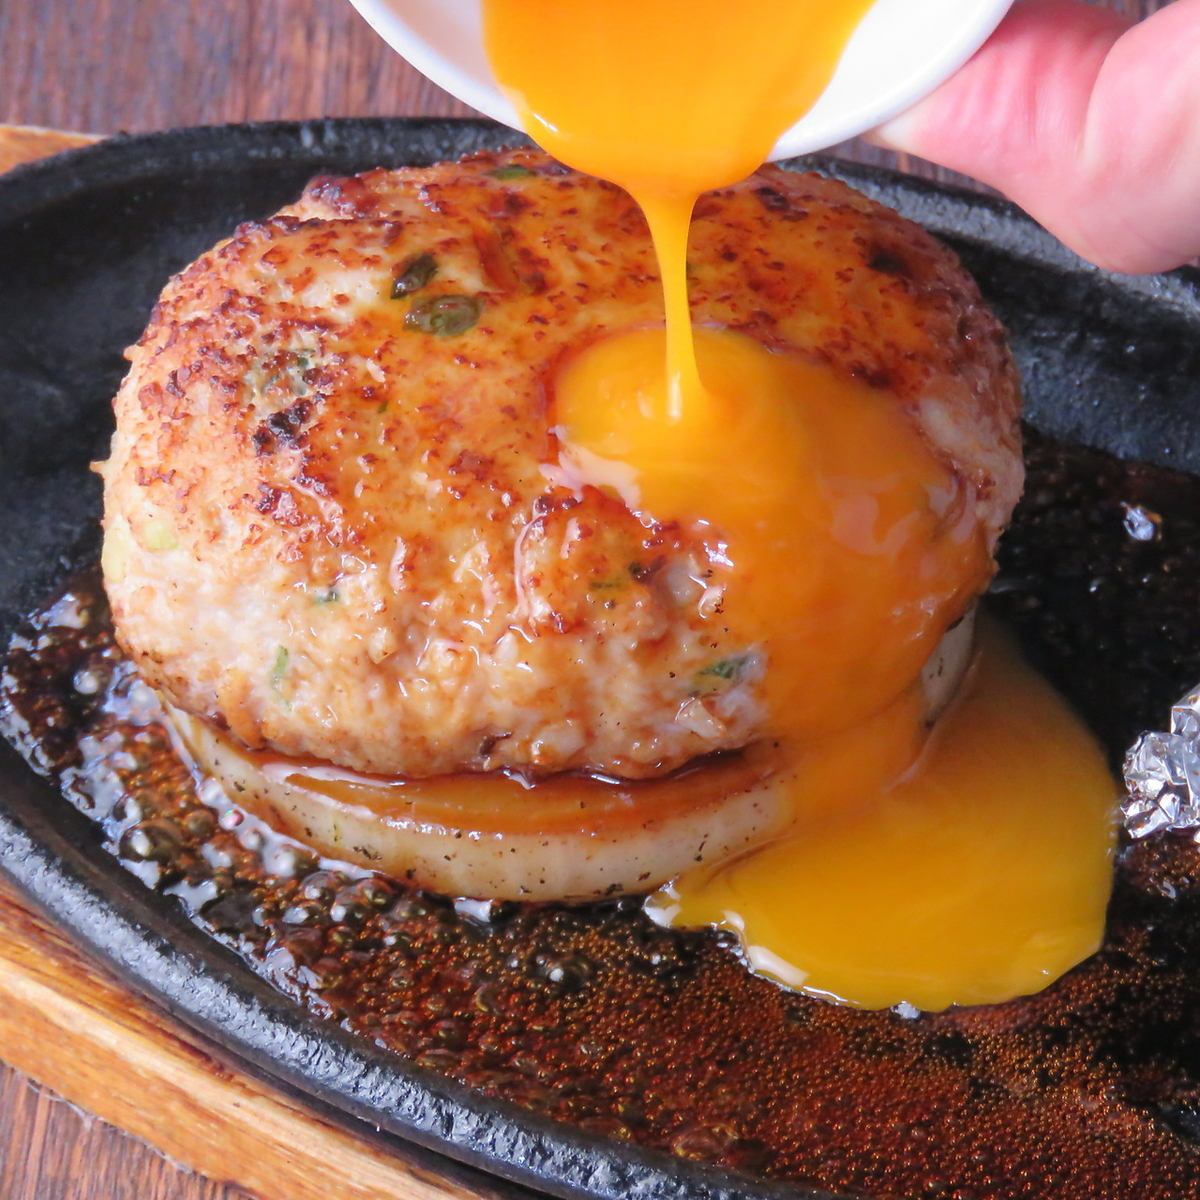 Their signature dish, Tsukune Burger, is served on an iron plate! Broiled chicken is also available!